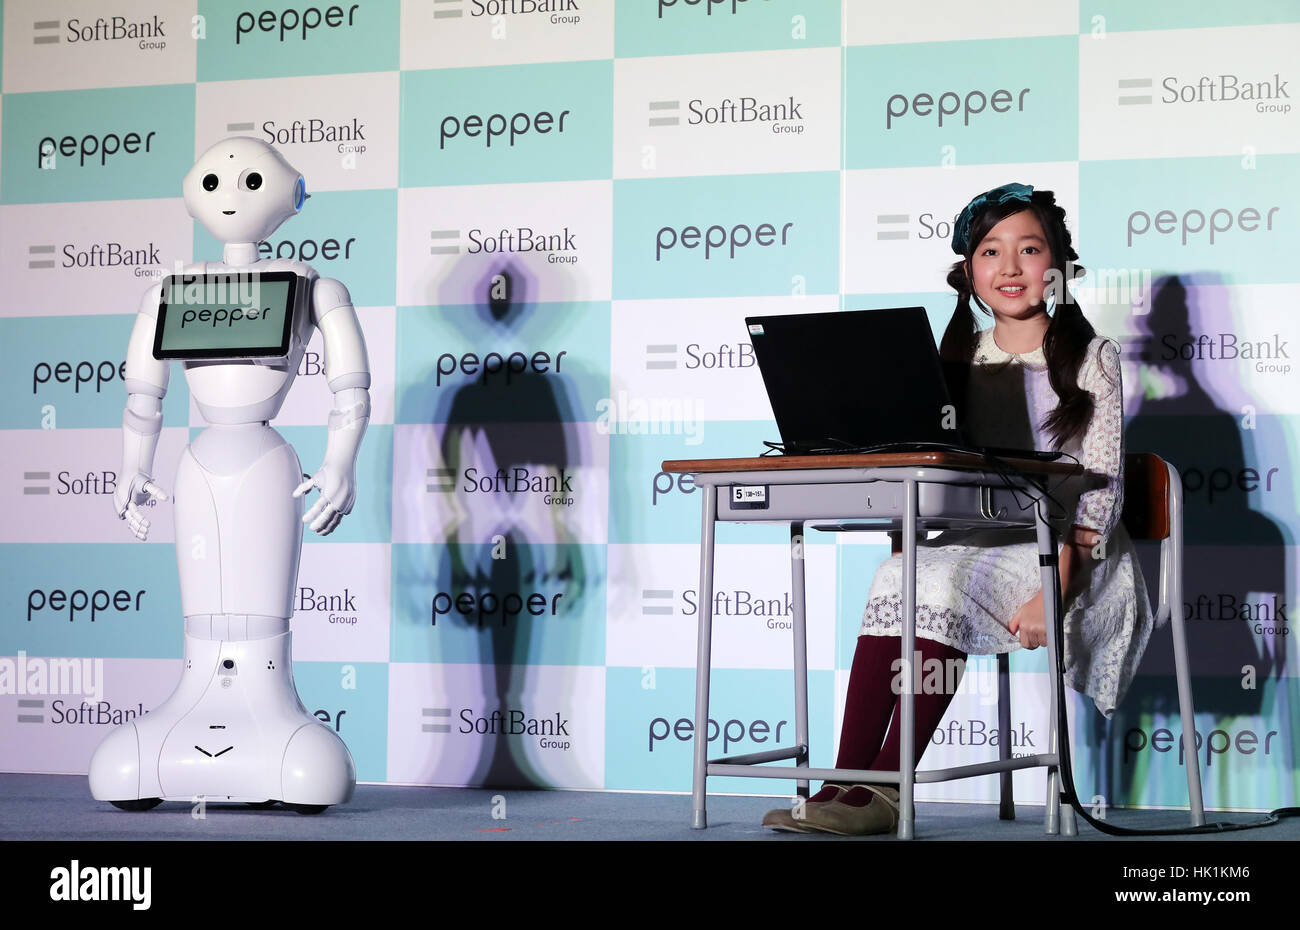 Tokyo, Japan. 25th Jan, 2017. 12-yea-old Japanese actress Kanon Tani (R) learns programing how to operate Softbank's humanoid robot Pepper at the company's headquarters in Tokyo on Wednesday, January 25, 2017. Softbank will provide 2,000 Peppers to 282 public elementary schools free of charge for the company's educational aid program called 'School Challenge'. Credit: Yoshio Tsunoda/AFLO/Alamy Live News Stock Photo